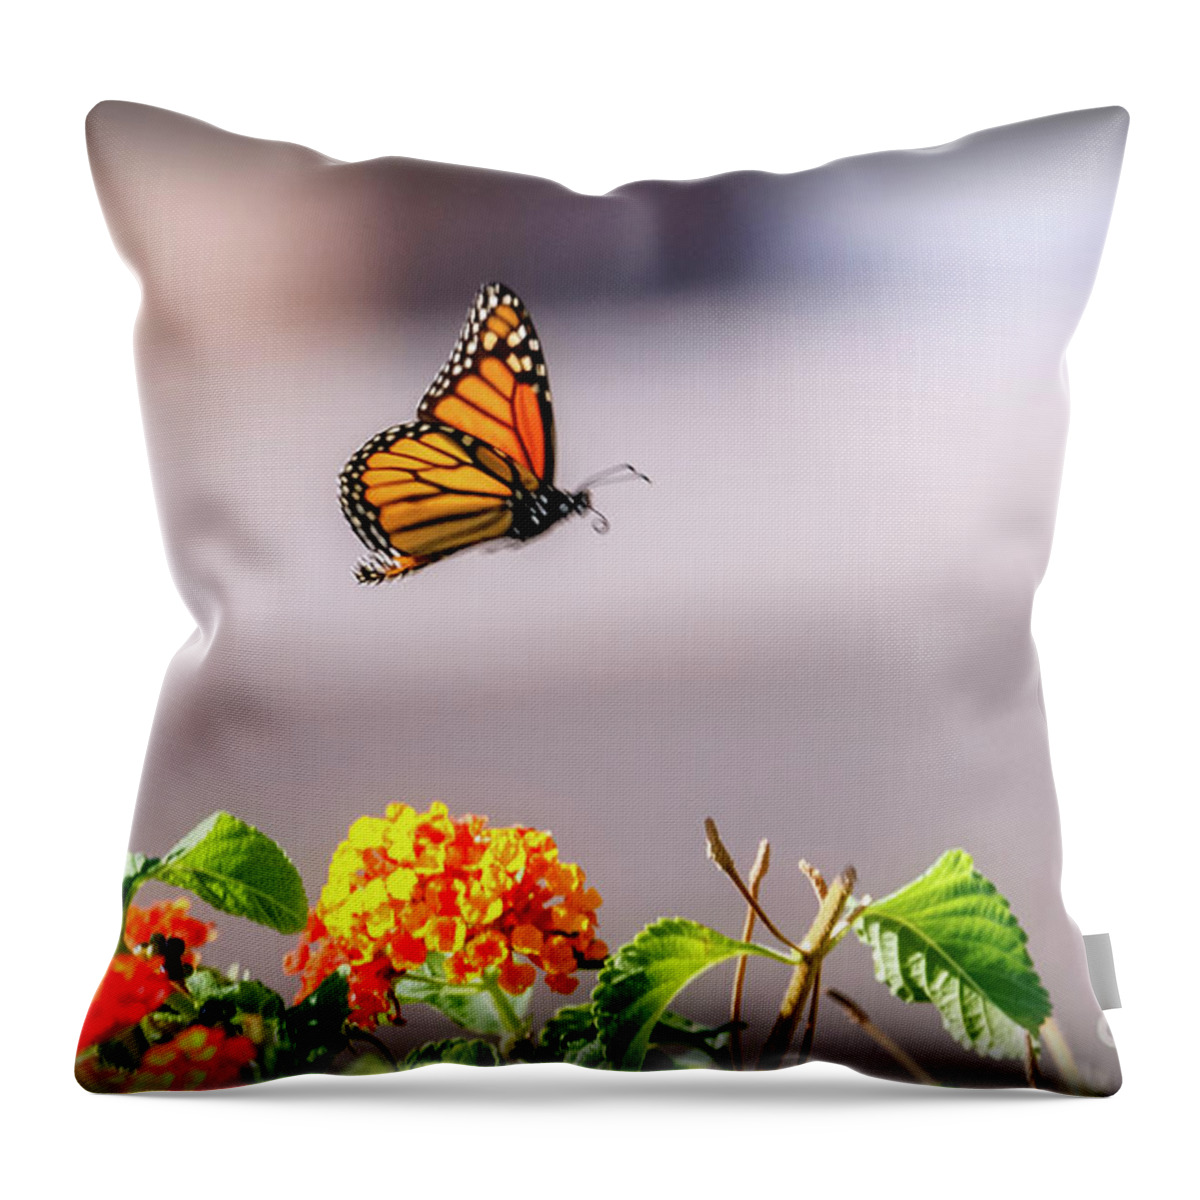 Orange Throw Pillow featuring the photograph Flying Monarch Butterfly by Robert Bales